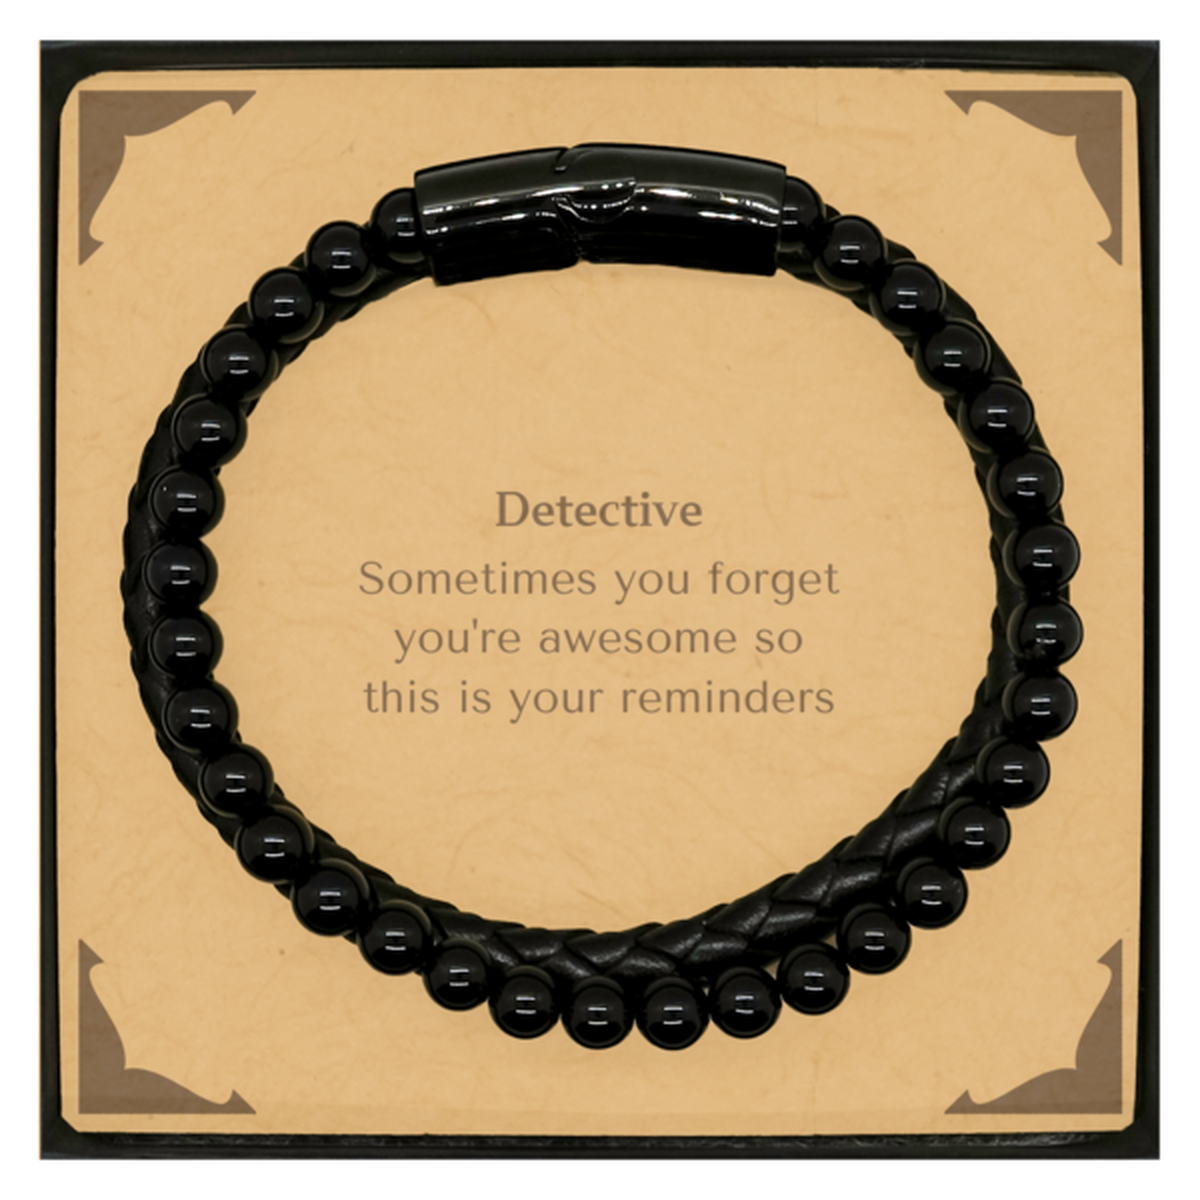 Sentimental Detective Stone Leather Bracelets, Detective Sometimes you forget you're awesome so this is your reminders, Graduation Christmas Birthday Gifts for Detective, Men, Women, Coworkers